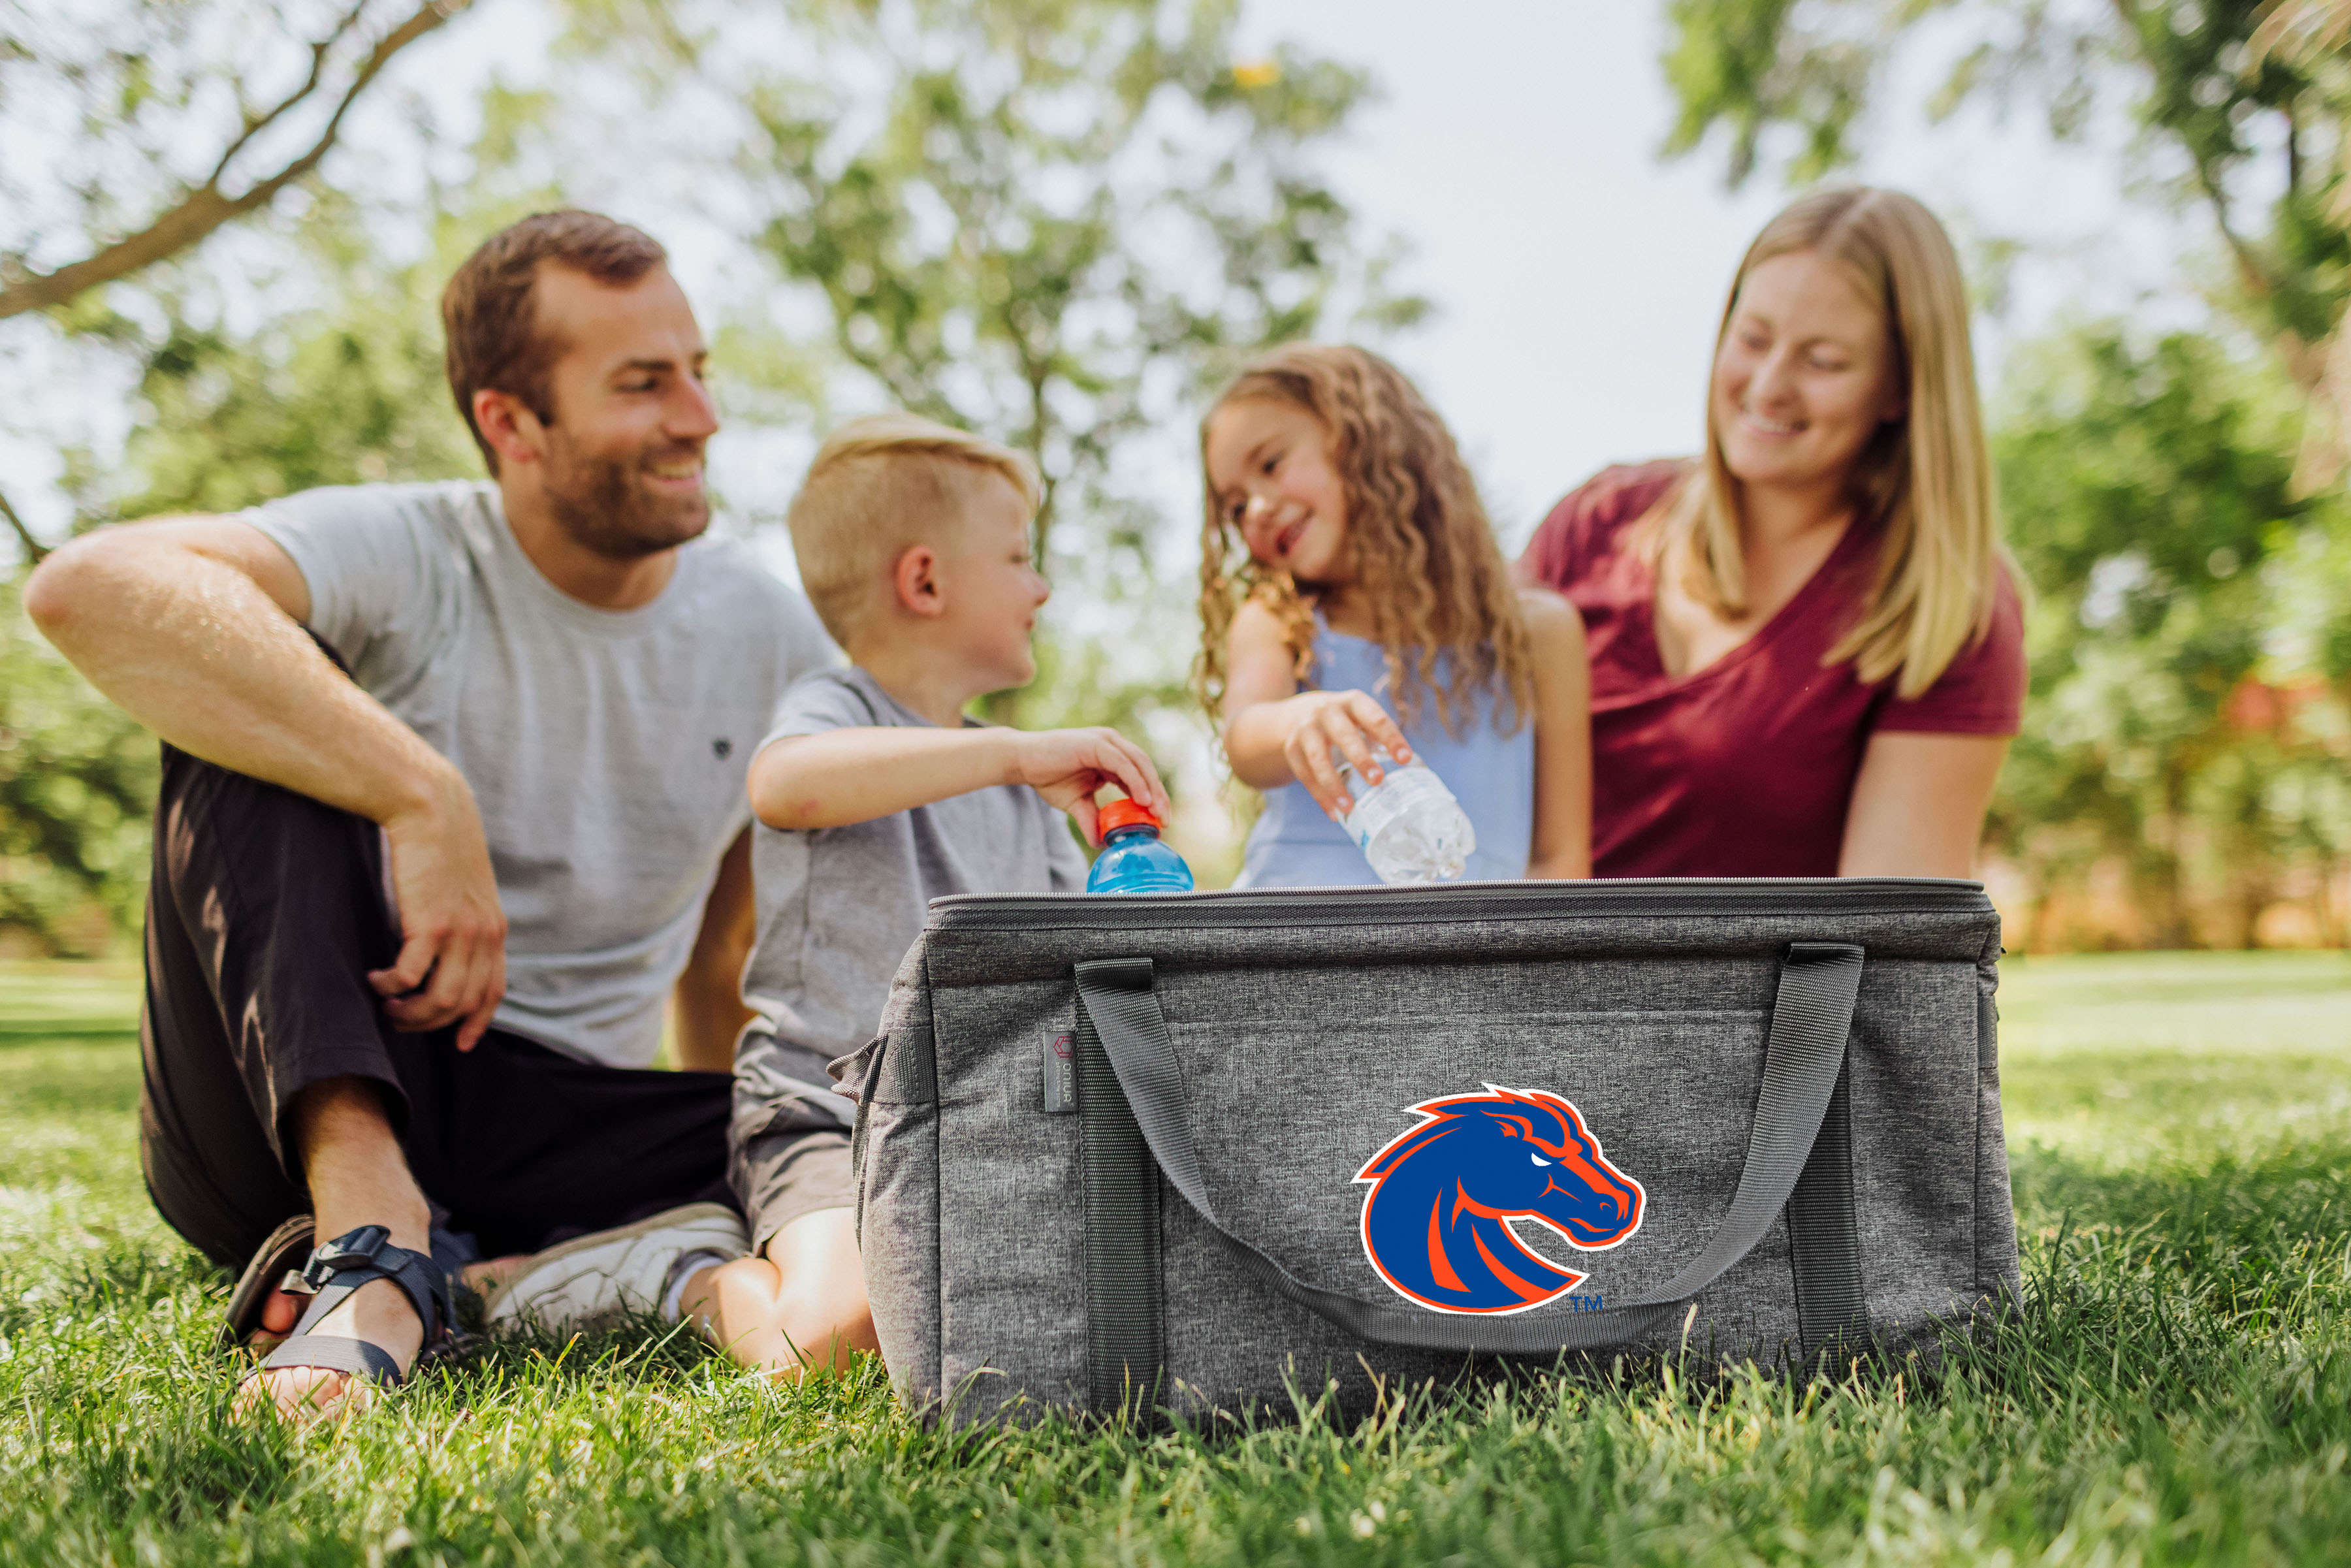 Boise State Broncos - 64 Can Collapsible Cooler